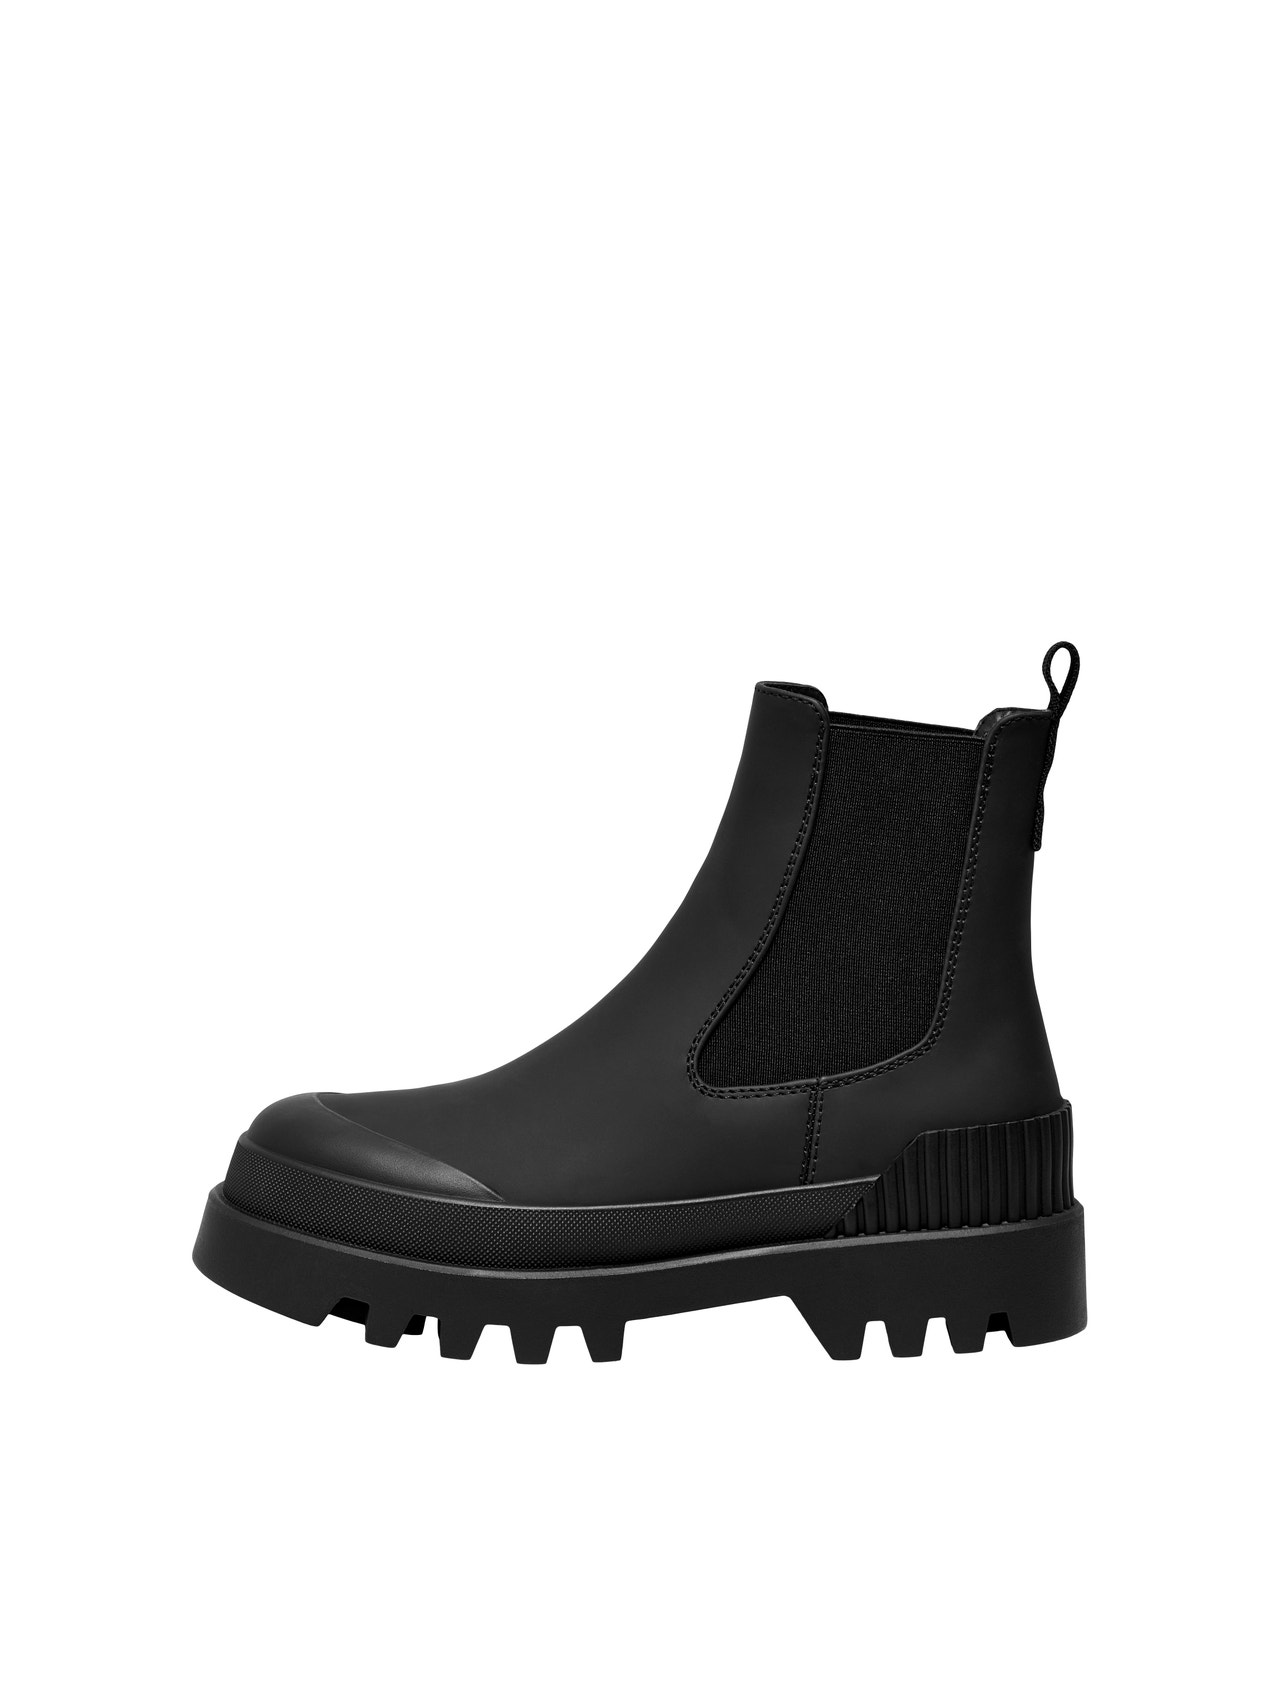 ONLY Chunky boots -Black - 15304863